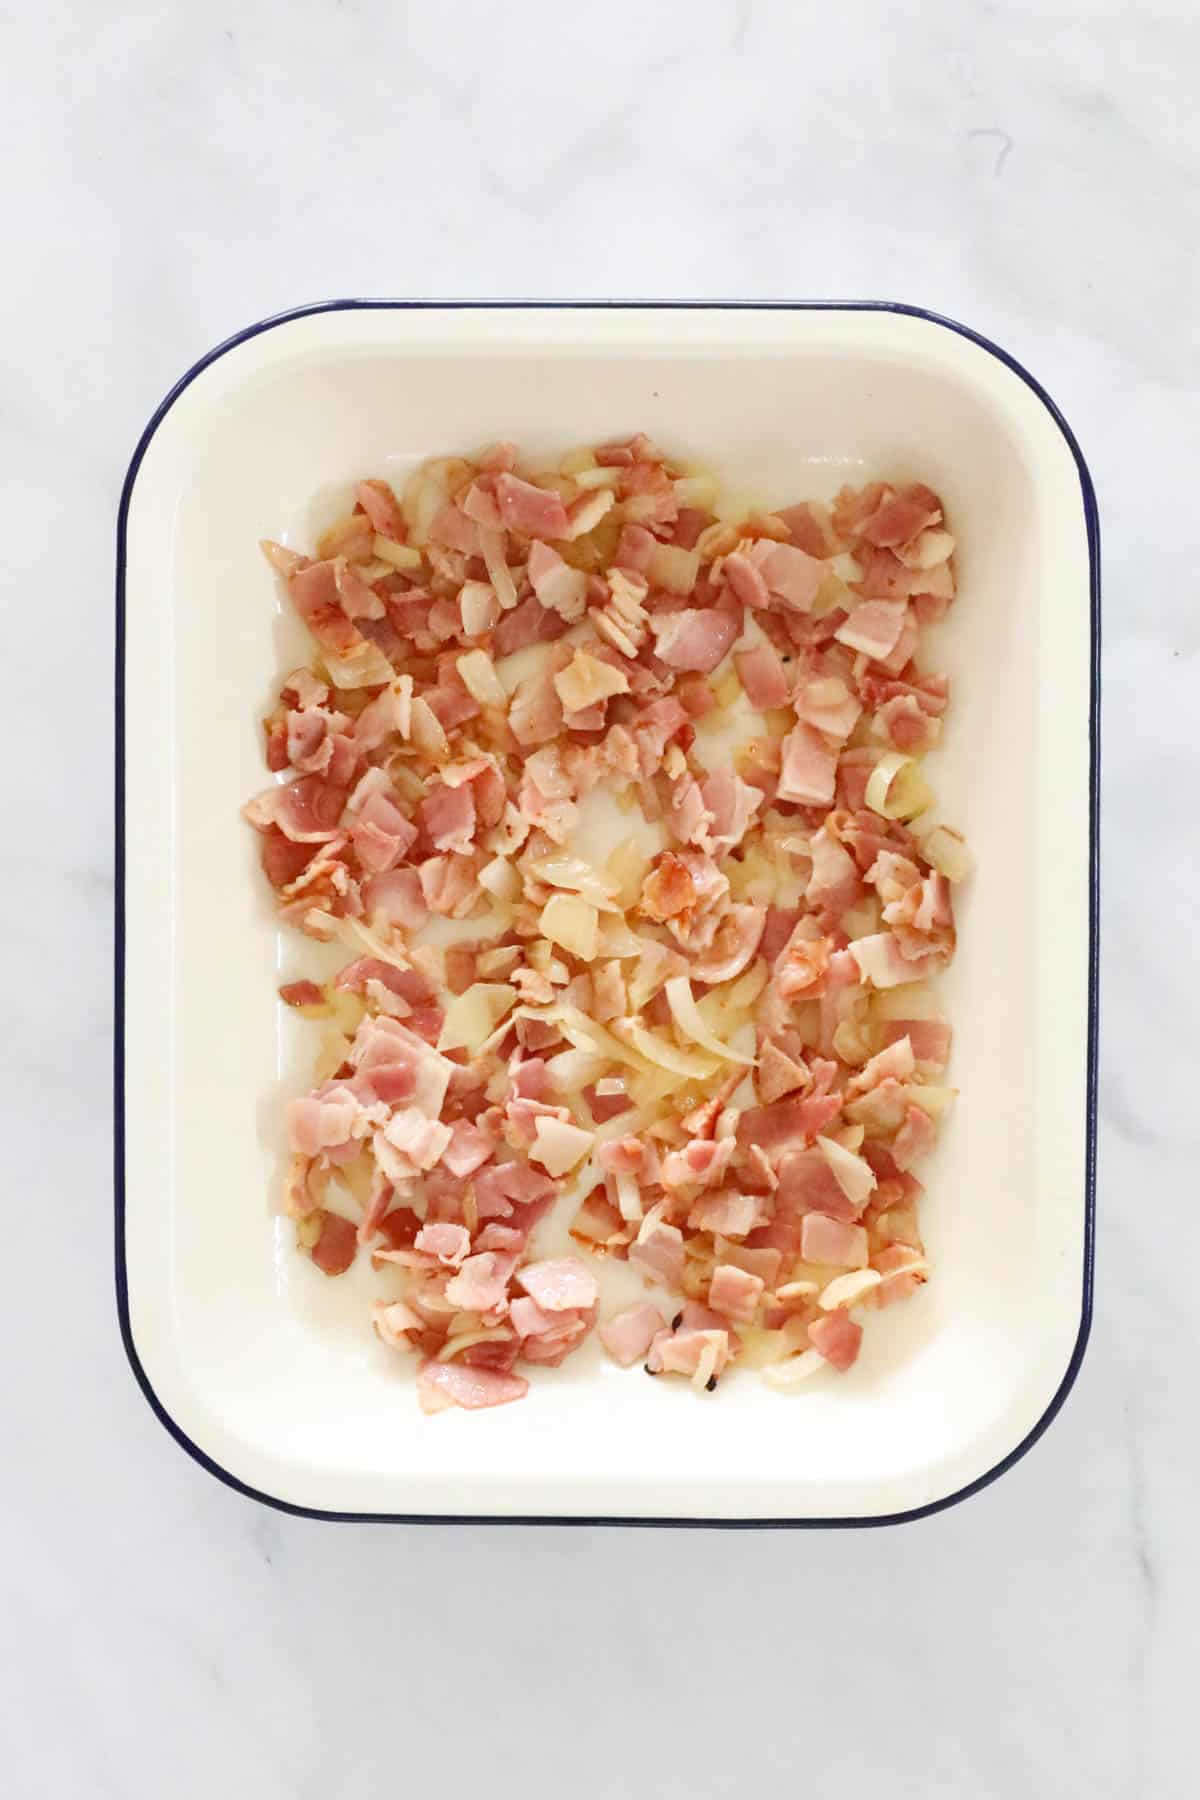 Diced and sauteed bacon and onion in an enamel casserole dish.